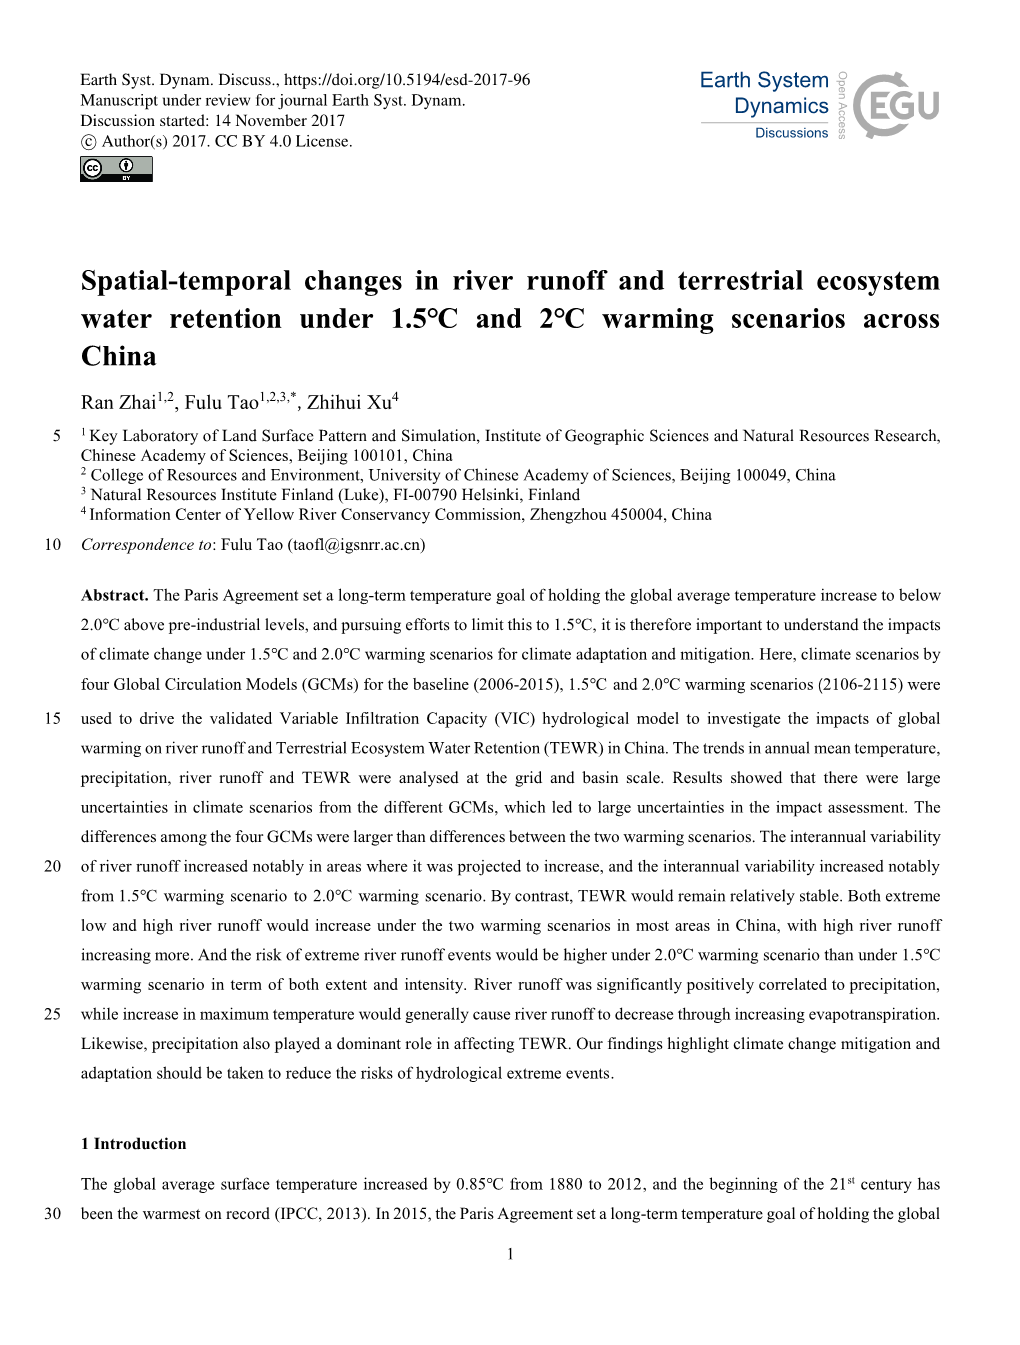 Spatial-Temporal Changes in River Runoff and Terrestrial Ecosystem Water Retention Under 1.5℃ and 2℃ Warming Scenarios Across China